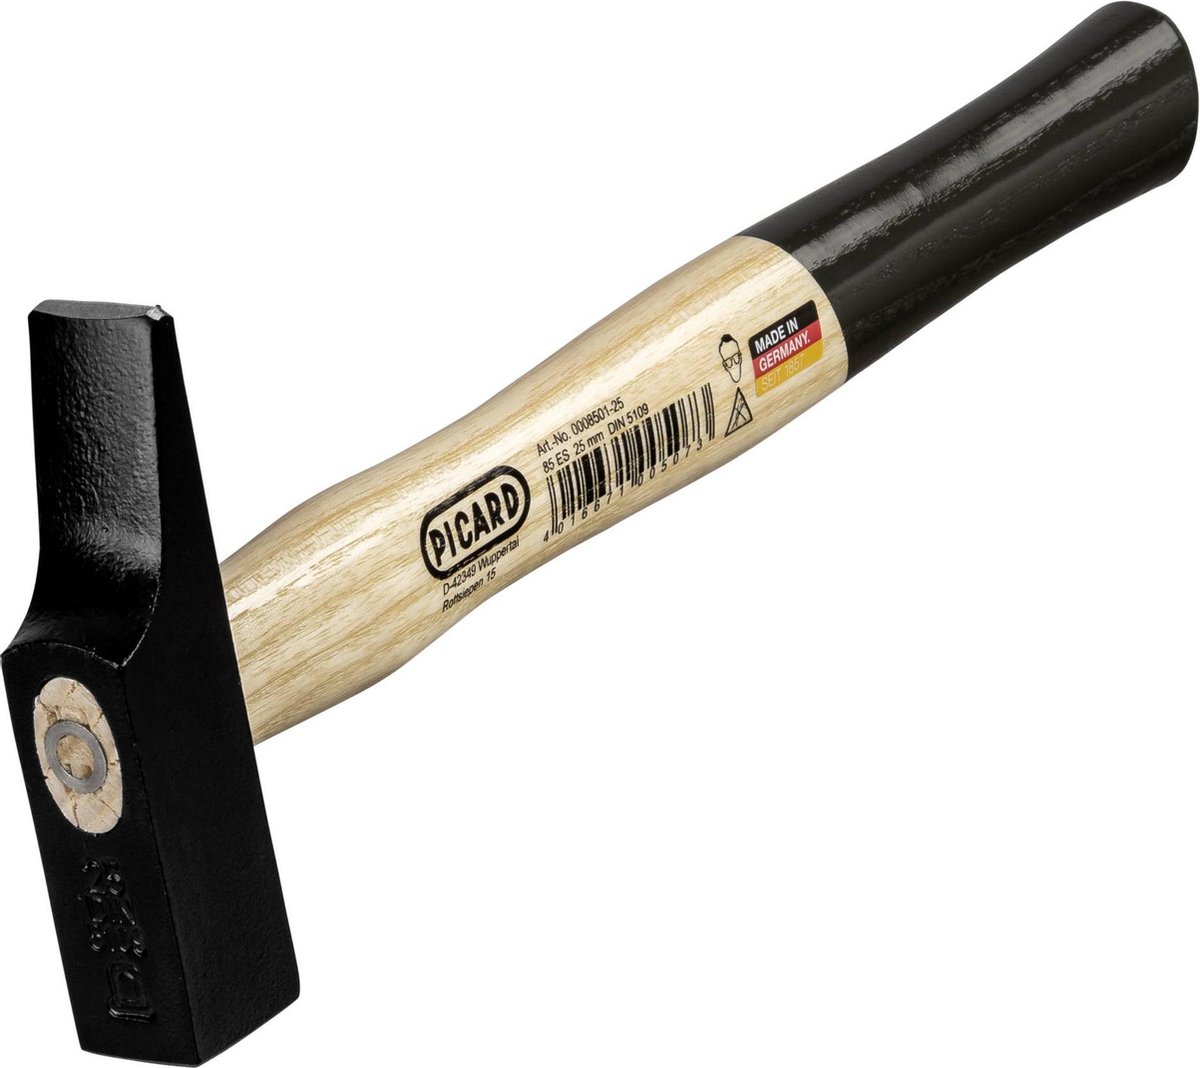 Picard Joiners Hammer ES 320 g